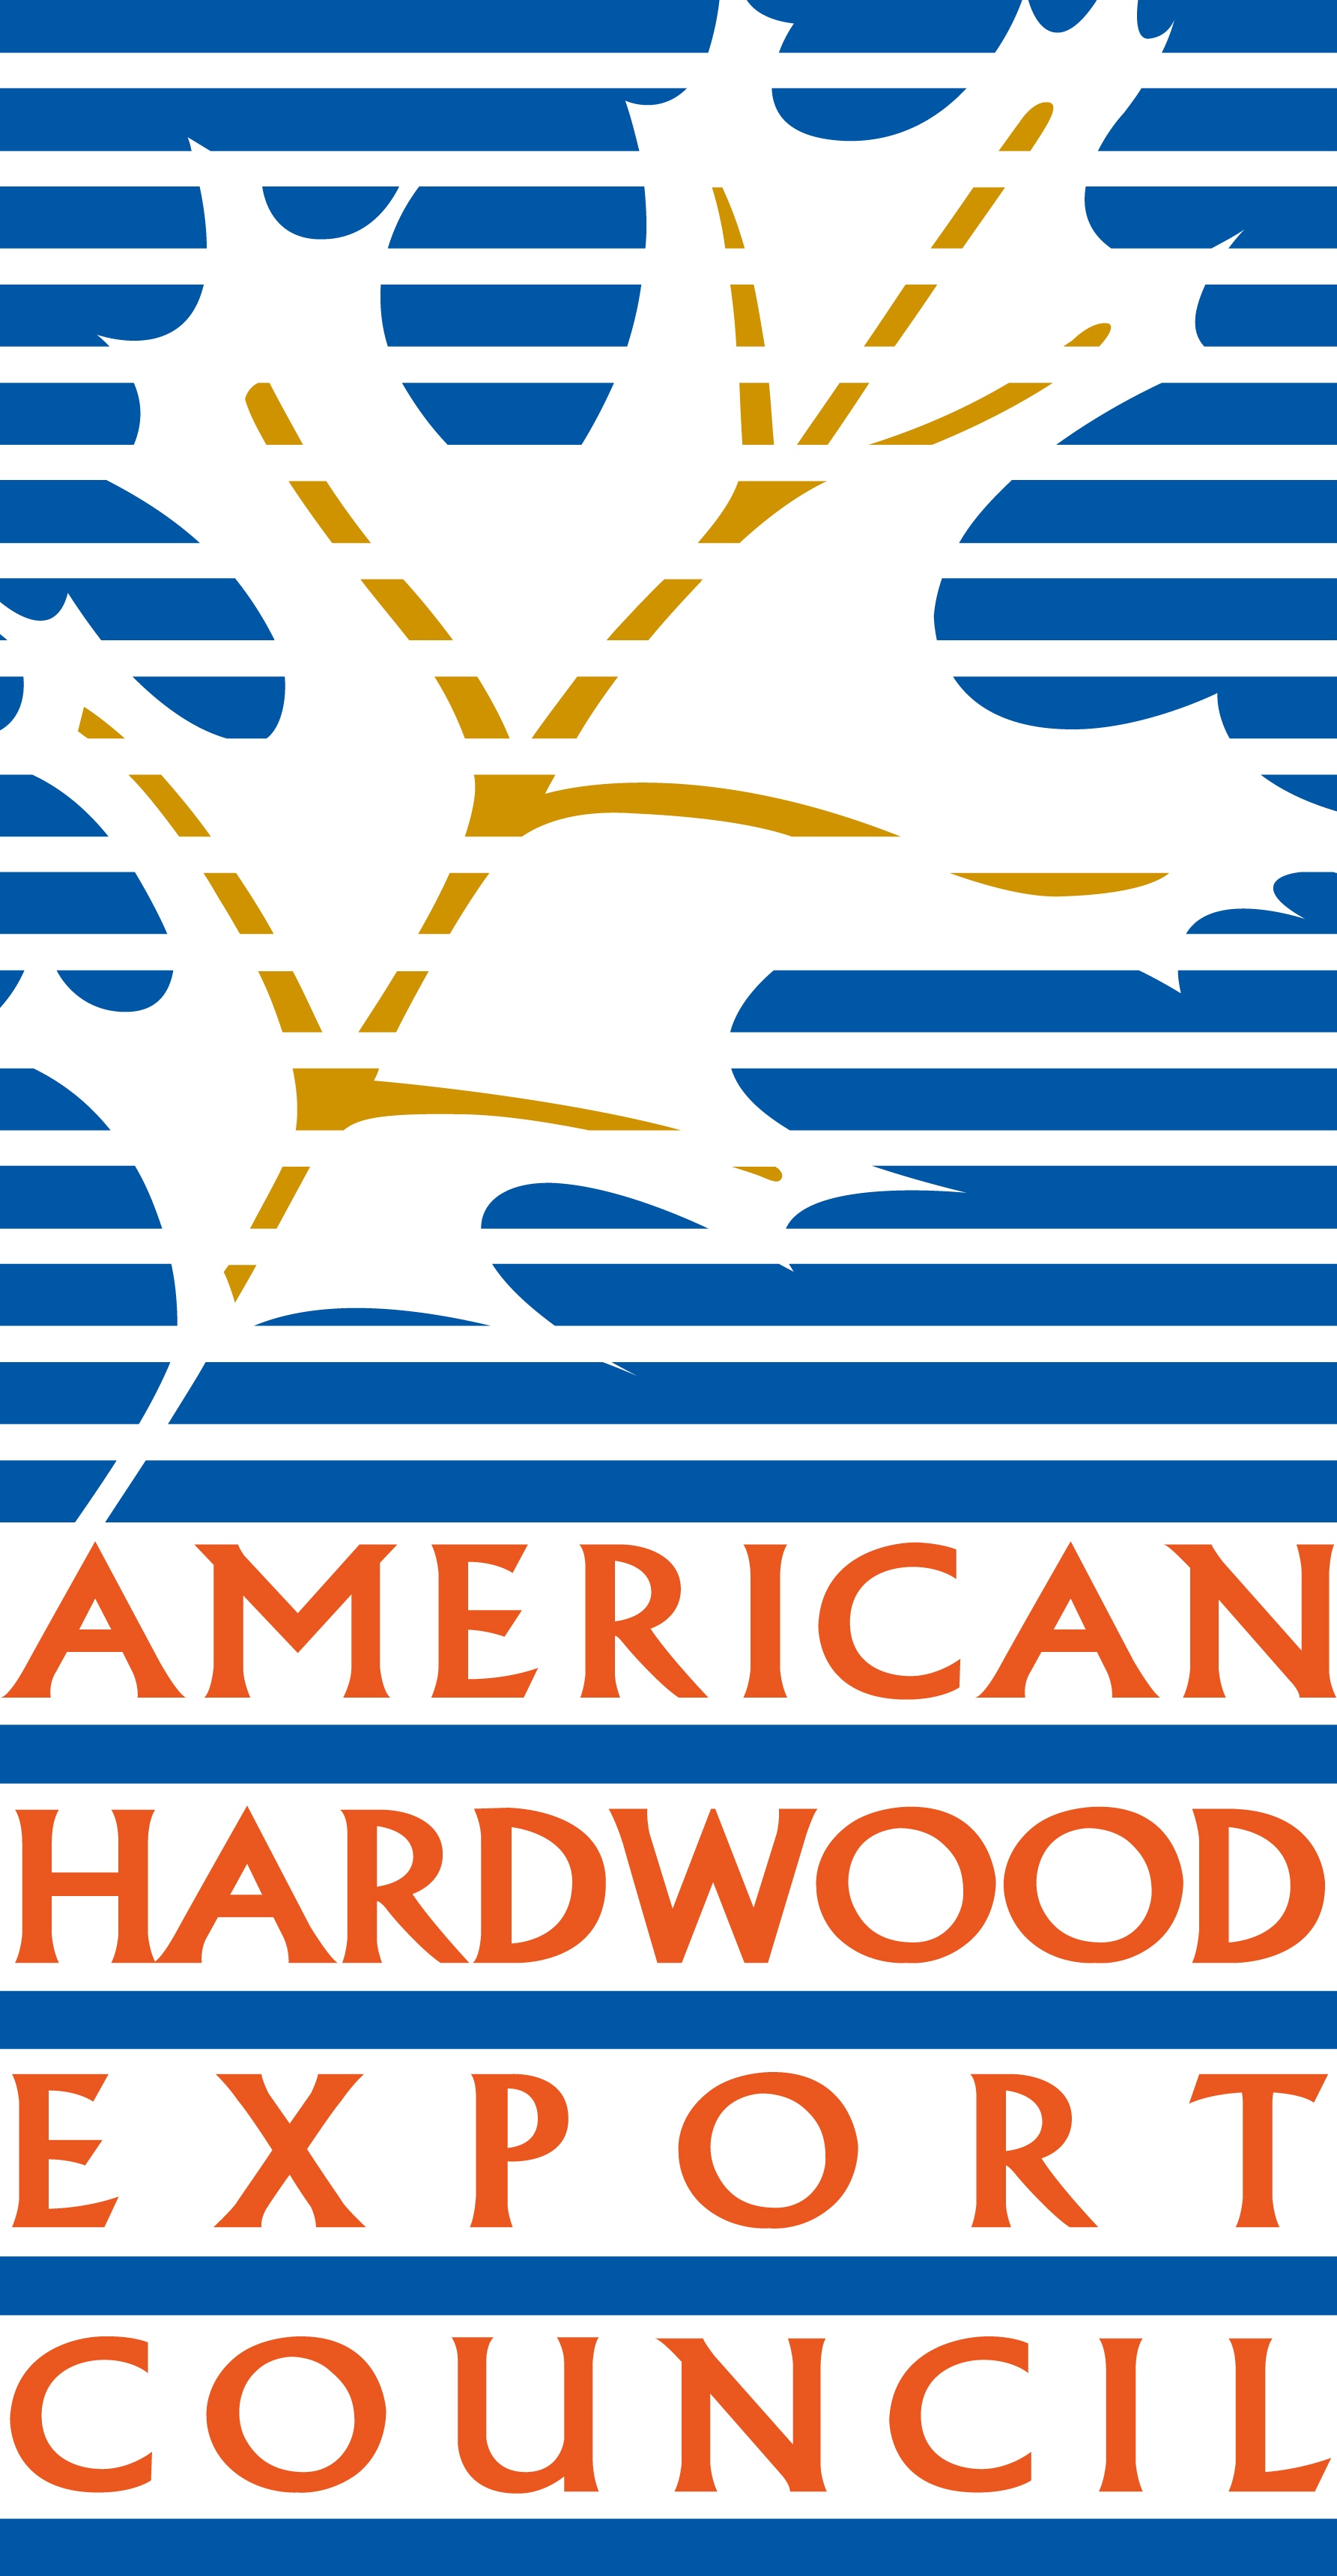 The American Hardwood Export Council